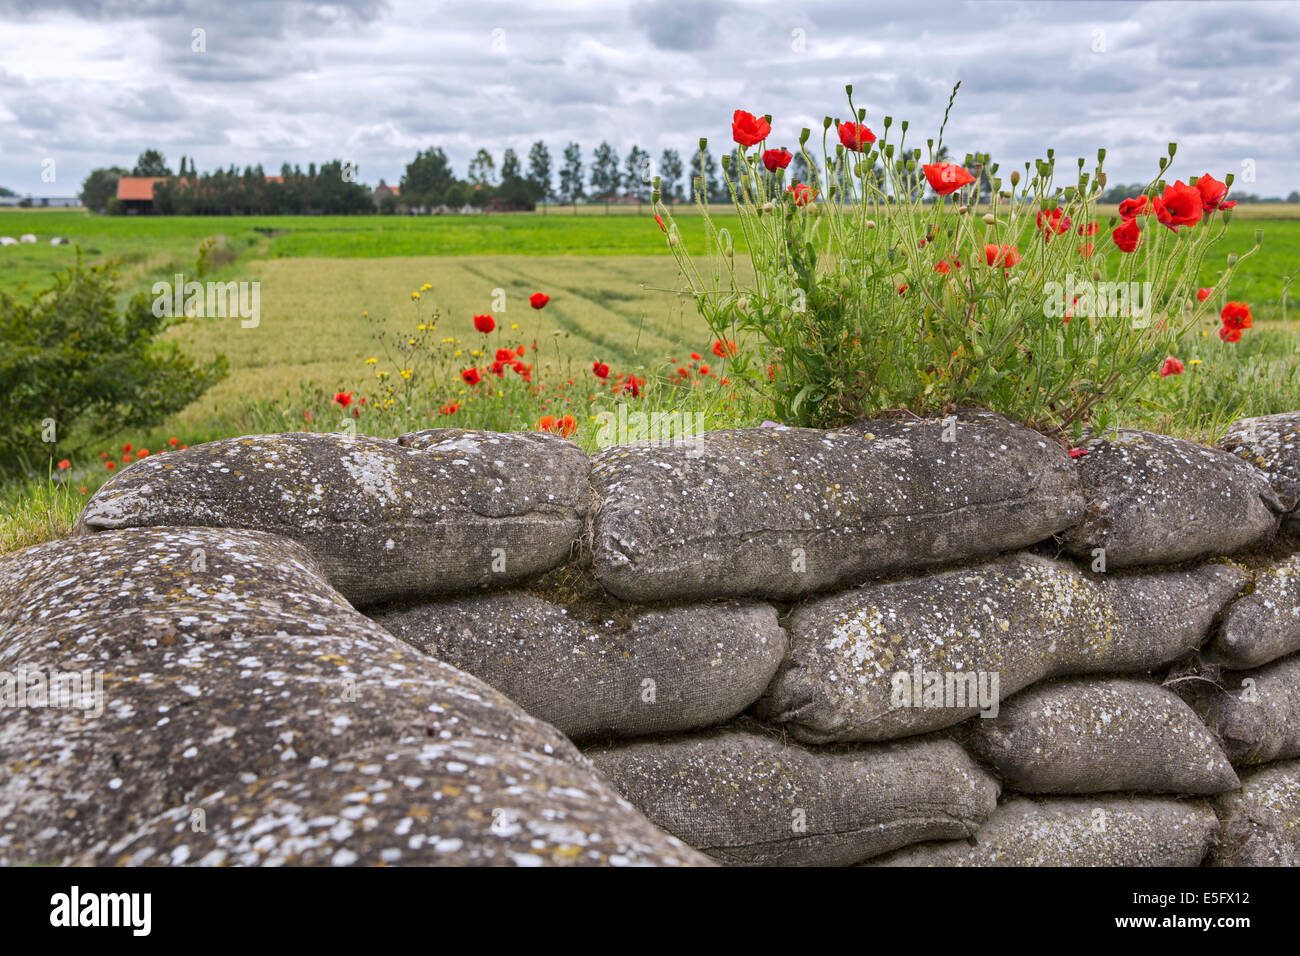 Poppies growing on sandbags at the Dodengang / Boyau de la Mort / Trench of Death, World War One trenches, Diksmuide, Belgium Stock Photo